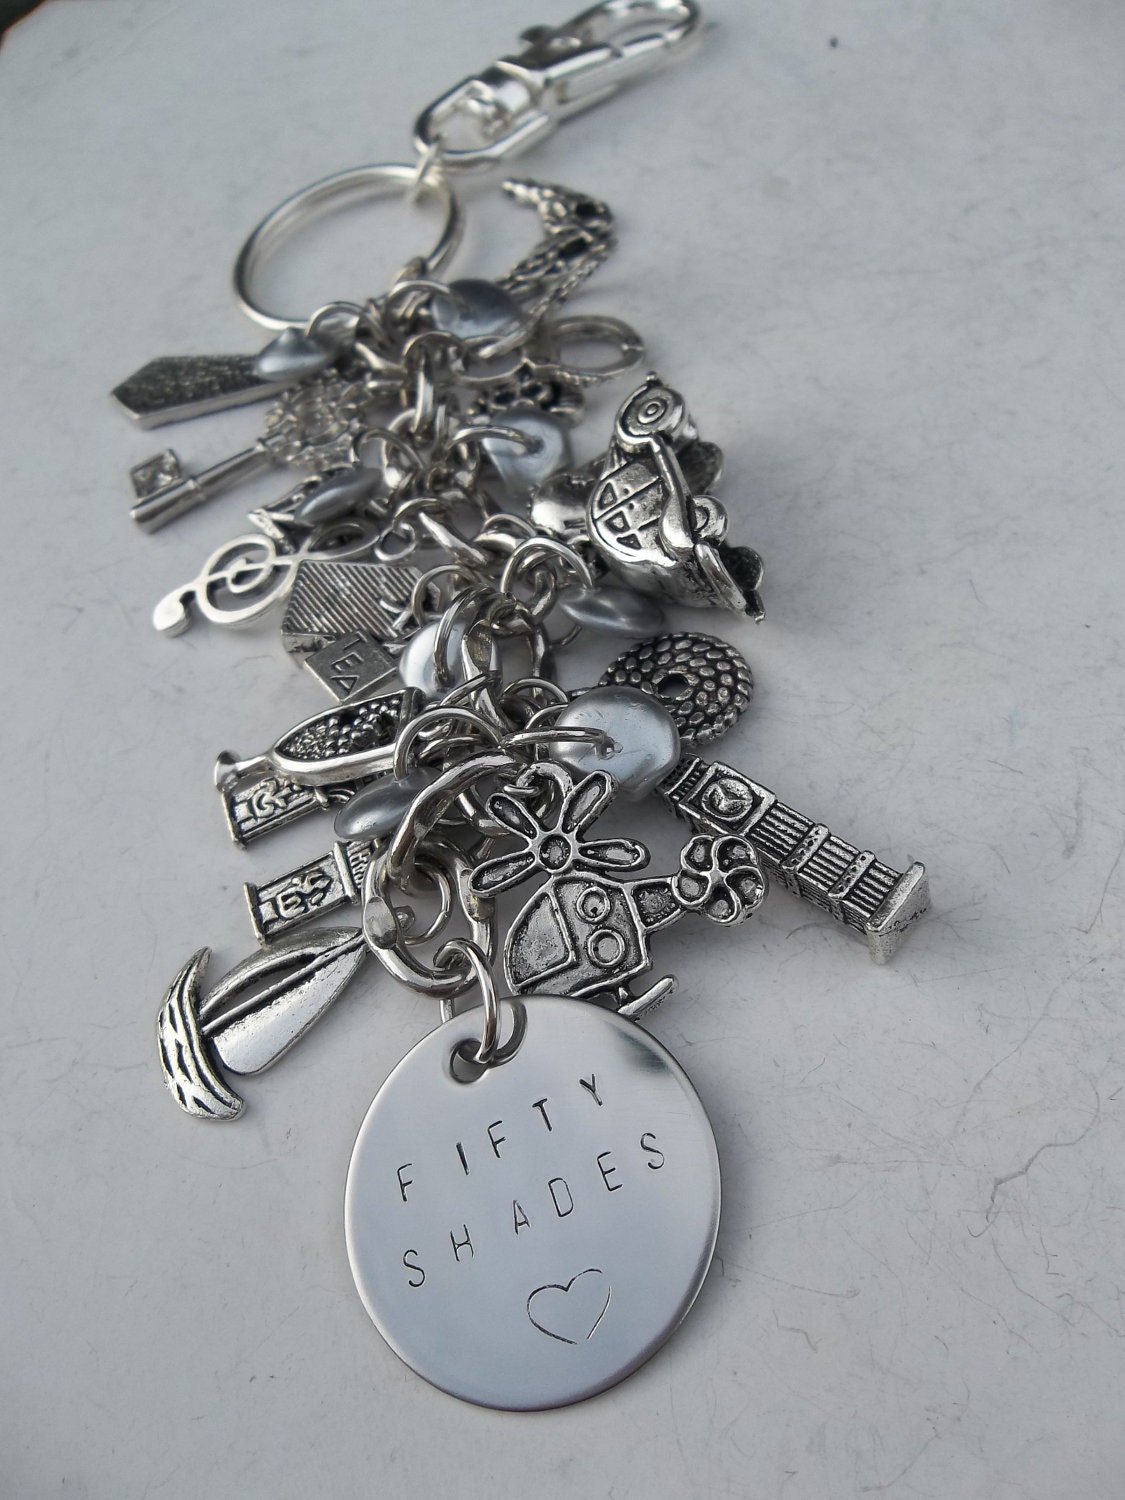 It's All About Fifty Shades of Grey Key Chain & Purse Bag Charm Hand Stamped w/Polished Glass Beads Inspired by the Book 50 Shades